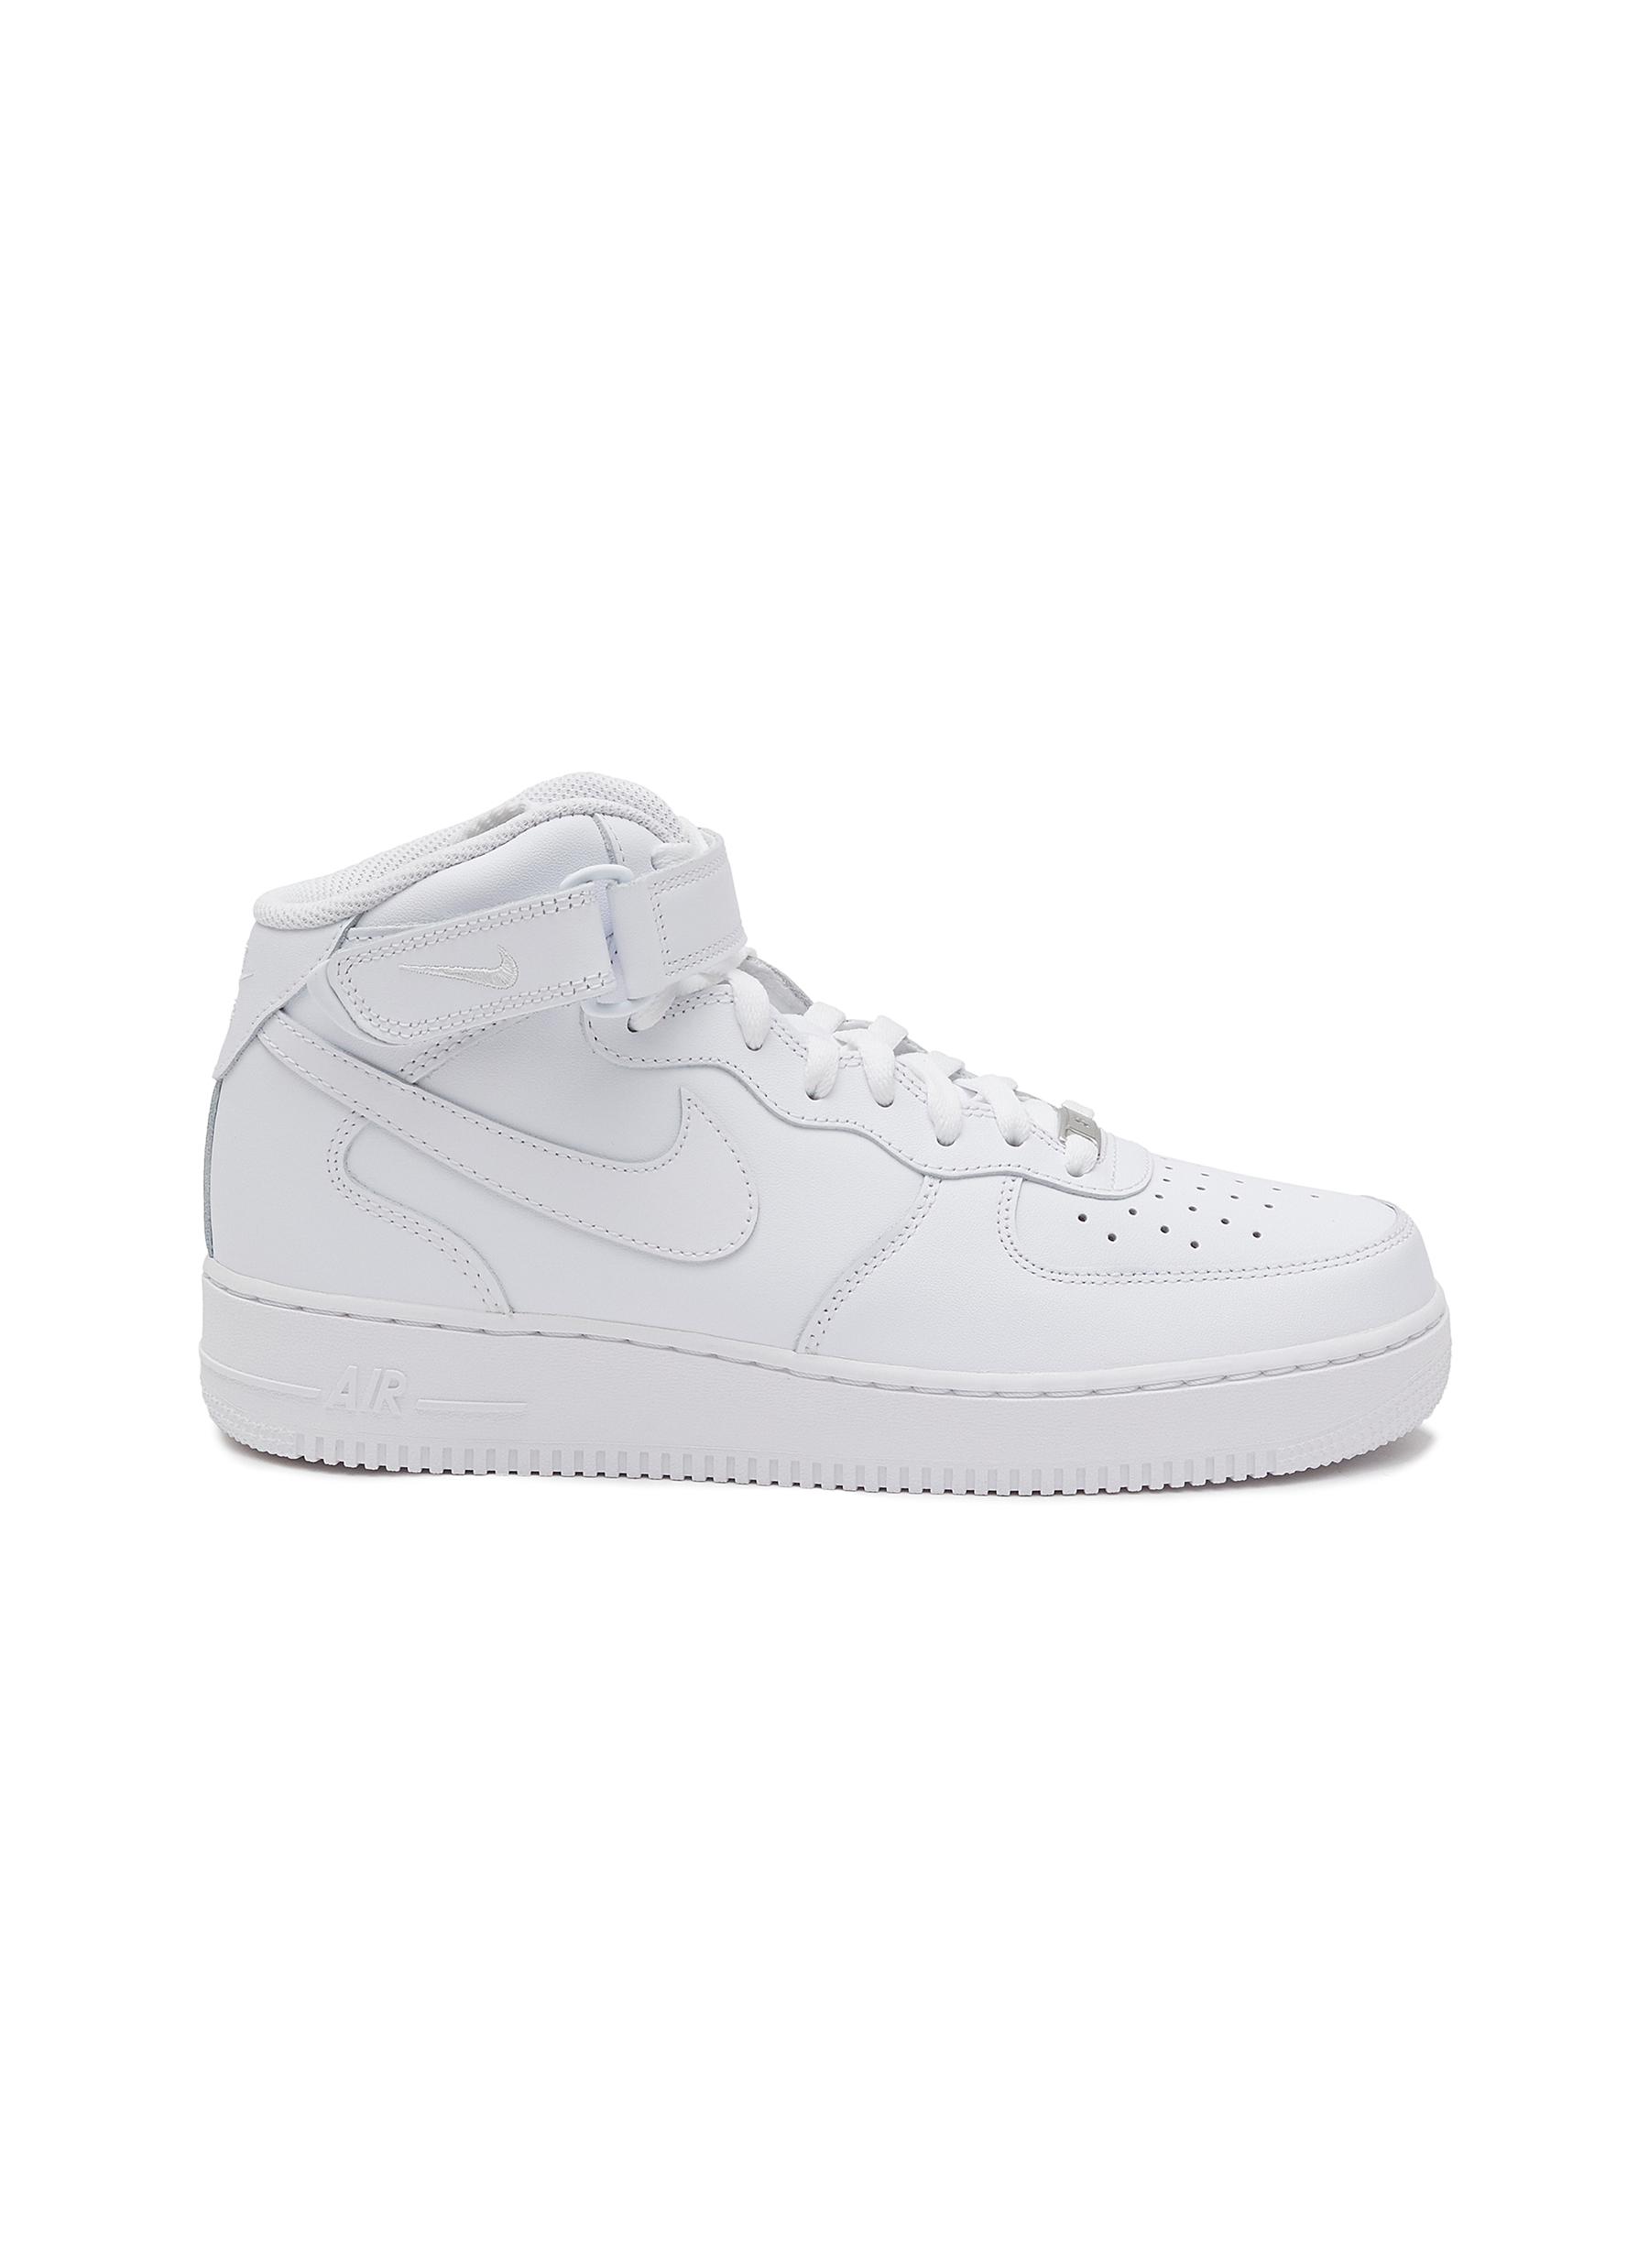 ‘AIR FORCE 1 MID '07’ HIGH TOP LACE UP SNEAKERS